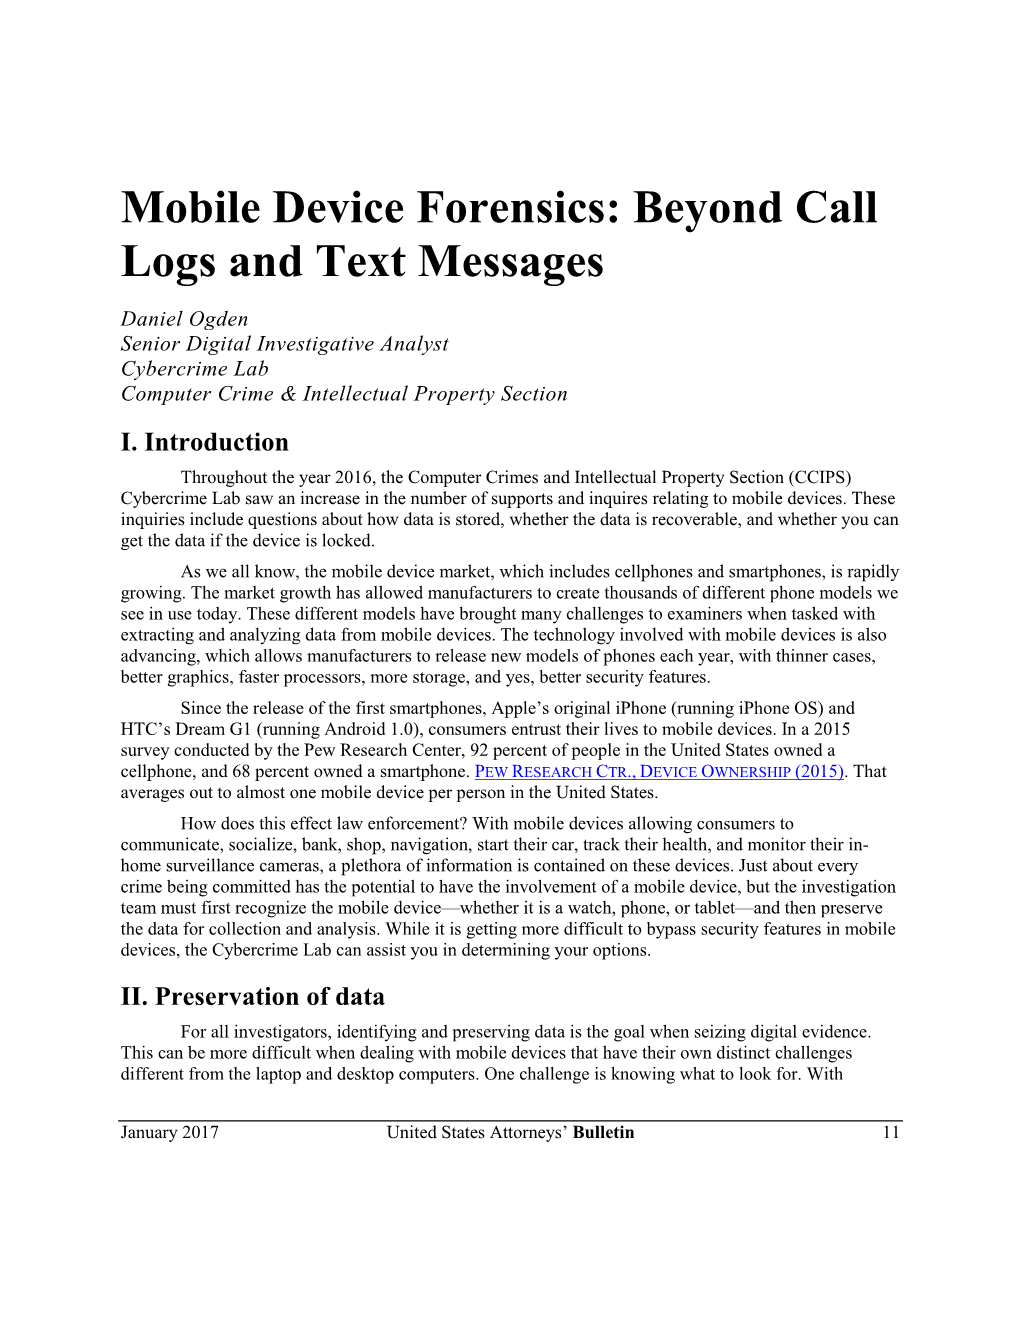 Mobile Device Forensics: Beyond Call Logs and Text Messages